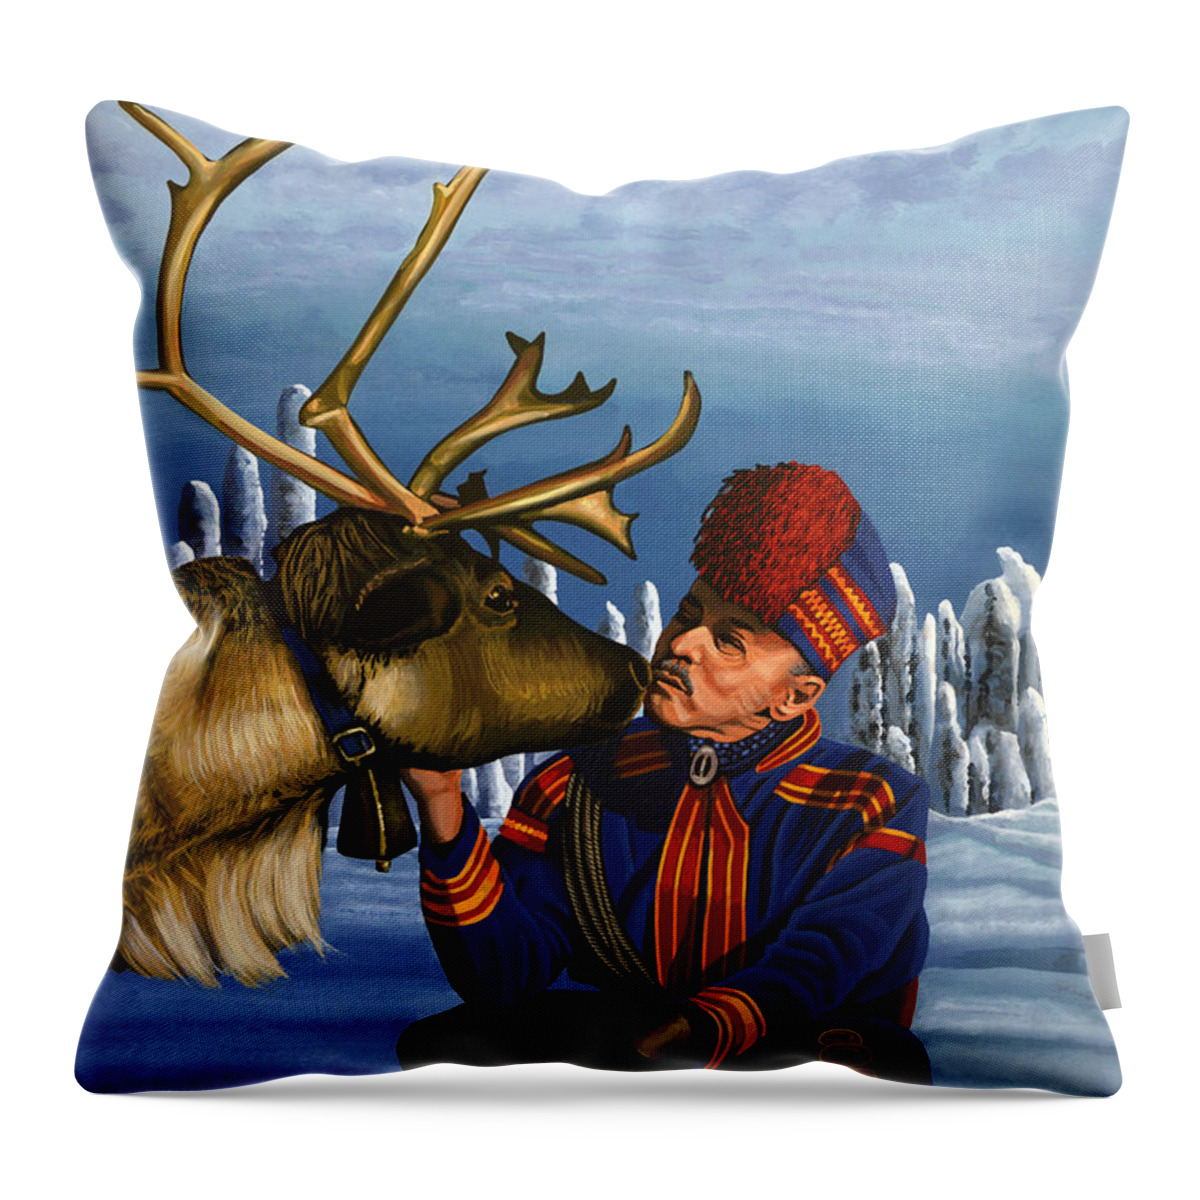 Finland Throw Pillow featuring the painting Deer Friends Of Finland by Paul Meijering